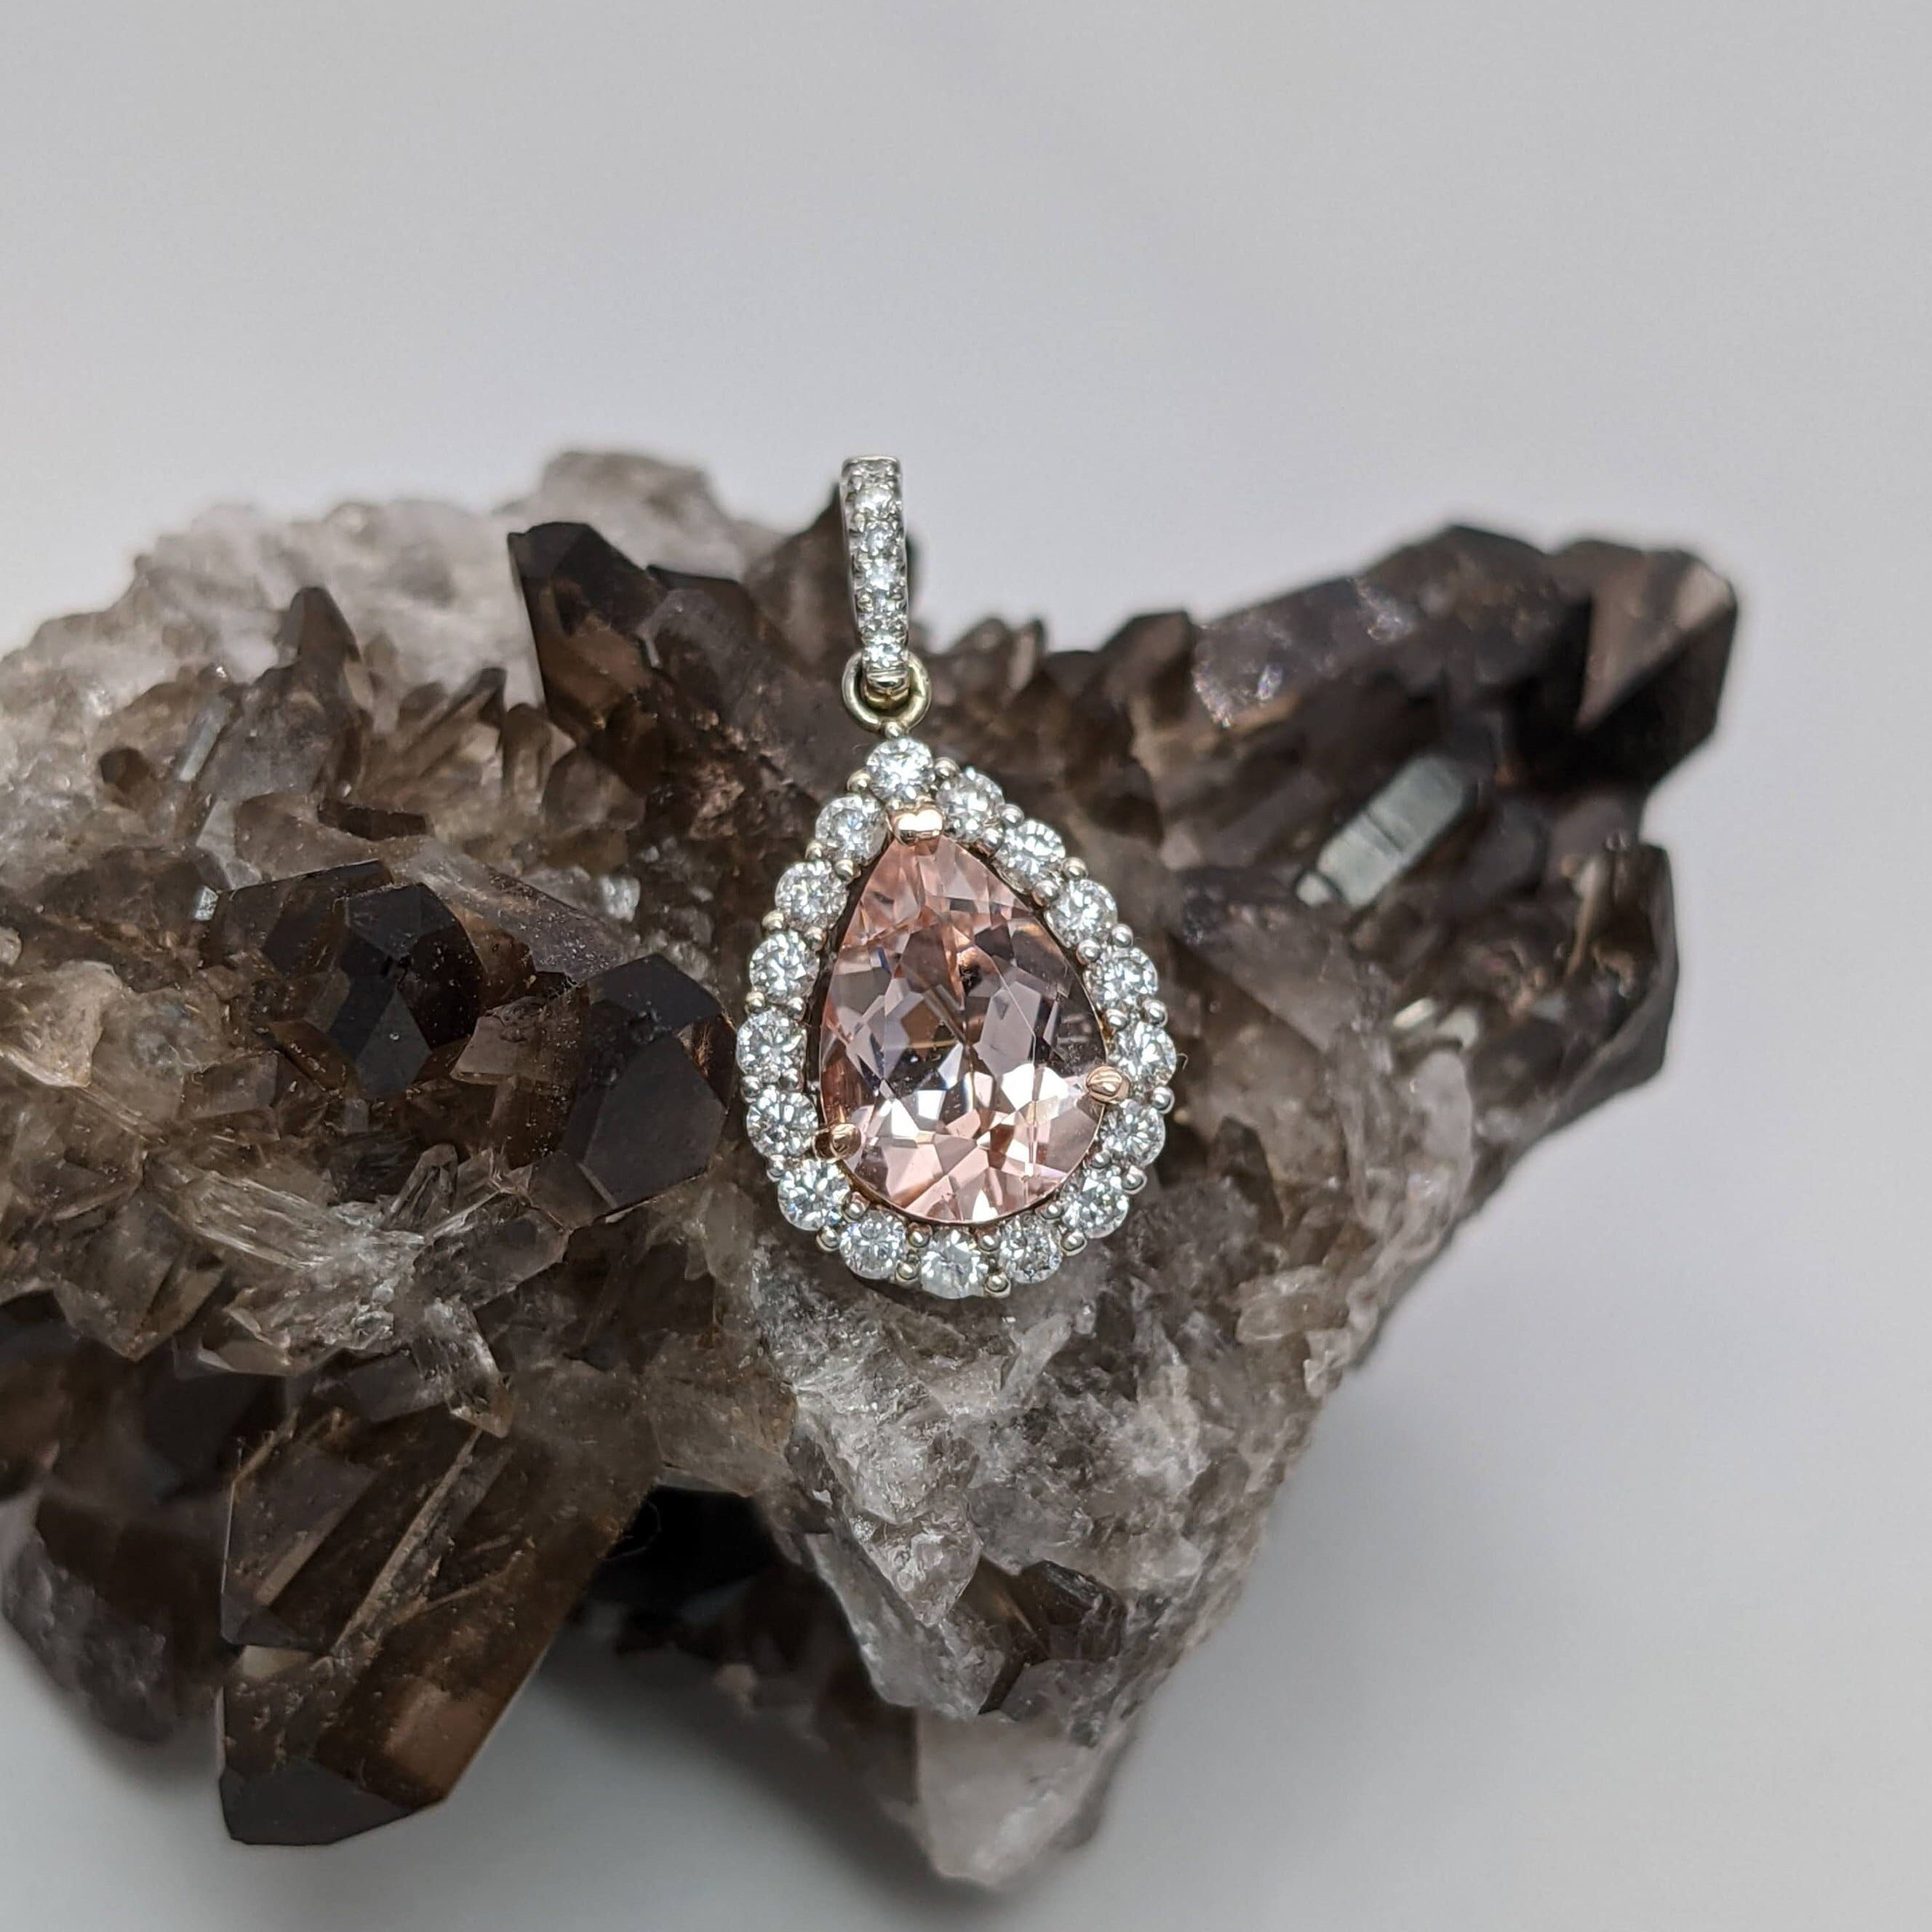 Pink AAA Morganite Pendant in Two Tone 14K Solid White and Rose Gold with Natural Diamonds | Pear 10x7mm, 1.6cts | Ready to Ship!